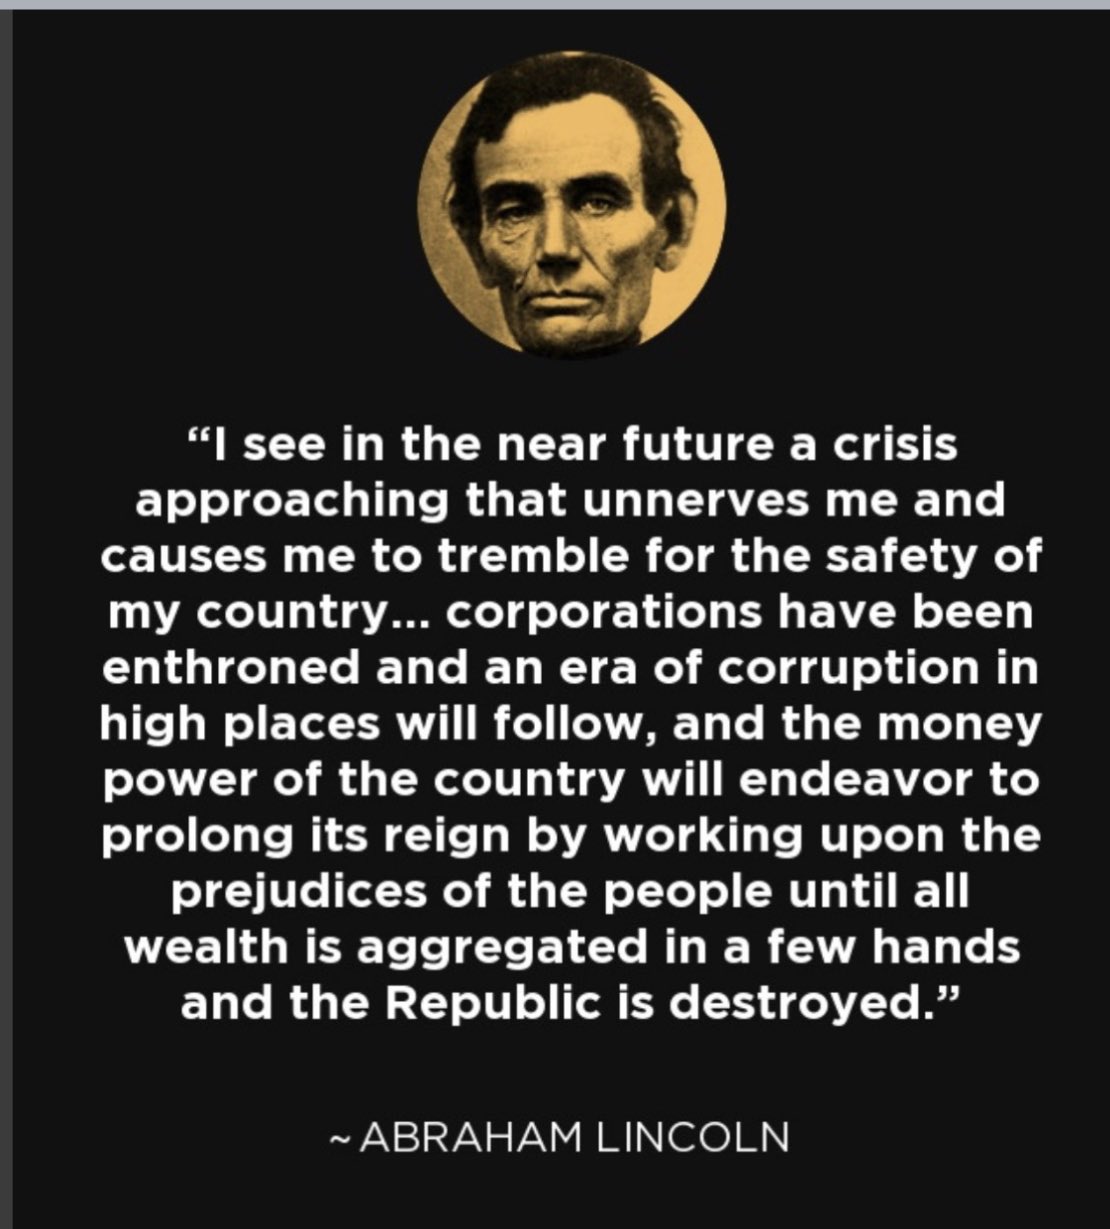 Dr Aseem Malhotra on X: Abraham Lincoln saw it coming. We are now at a  crossroads. We stay silent or we fight for democracy and humanity. You know  which path to take